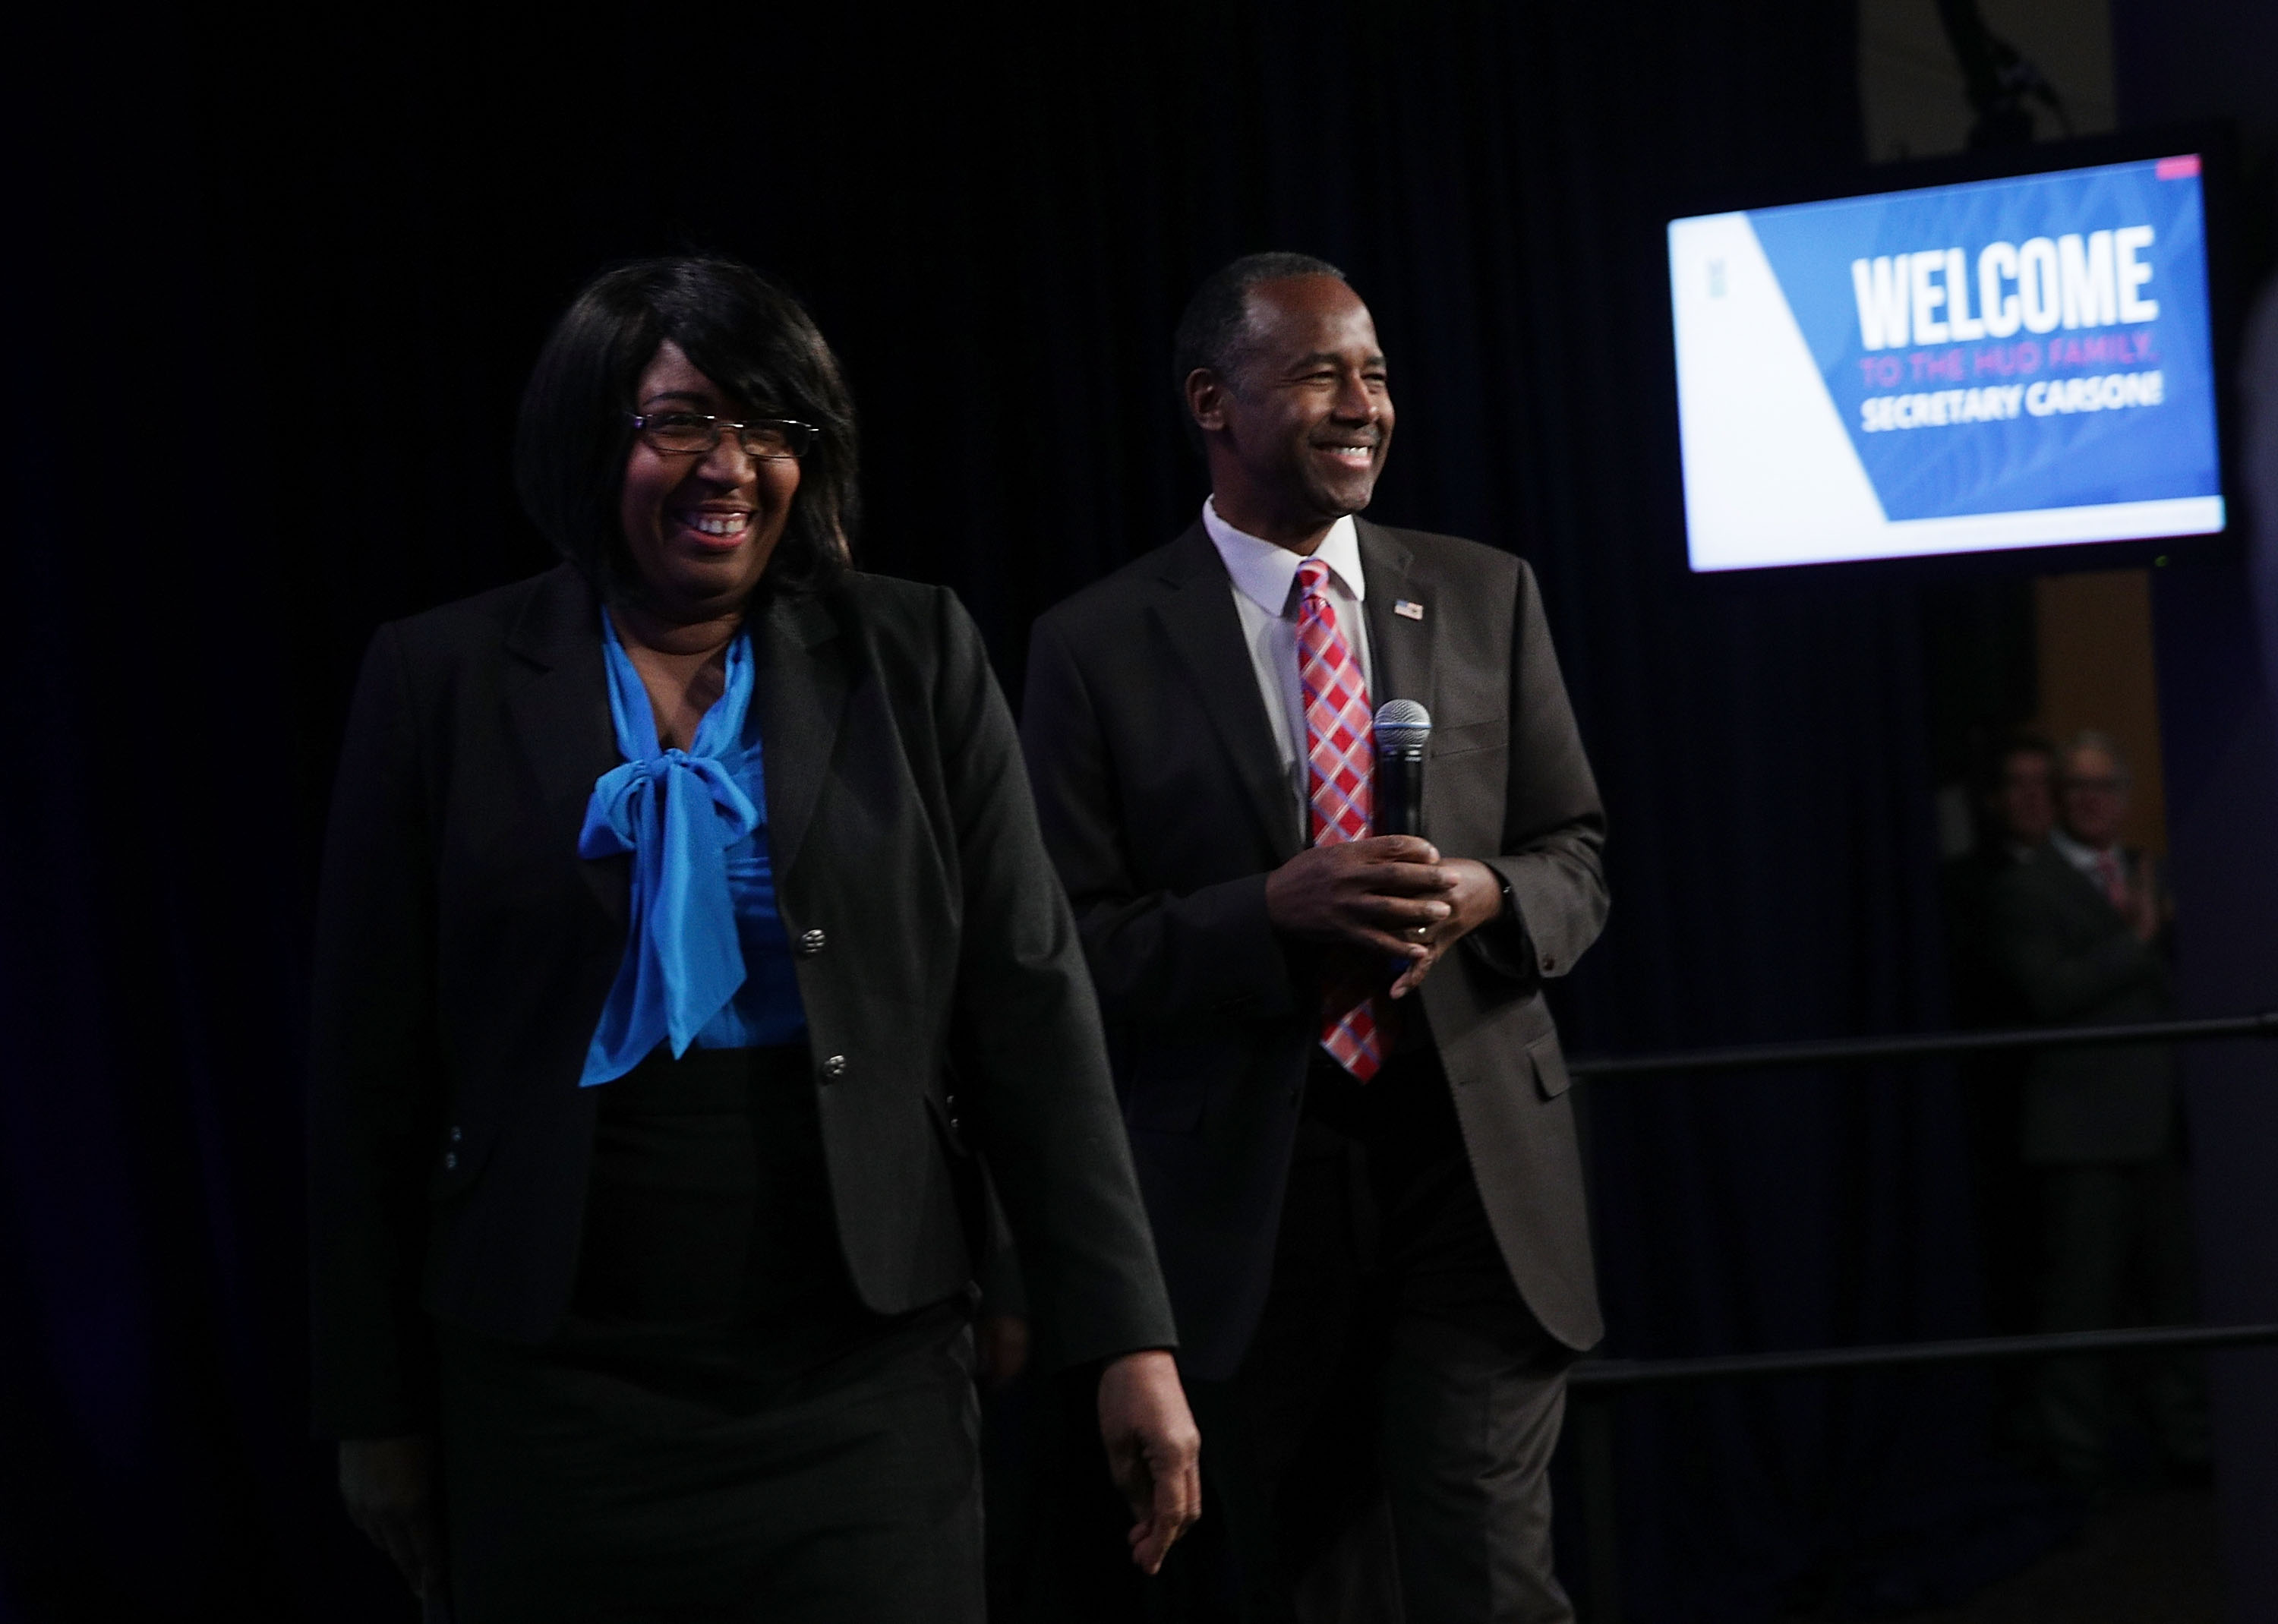 U.S. Housing and Urban Development (HUD) Secretary Ben Carson and his wife Candy Carson walk on stage prior to his address to his employees March 6, 2017 in Washington, DC. (Alex Wong—Getty Images)